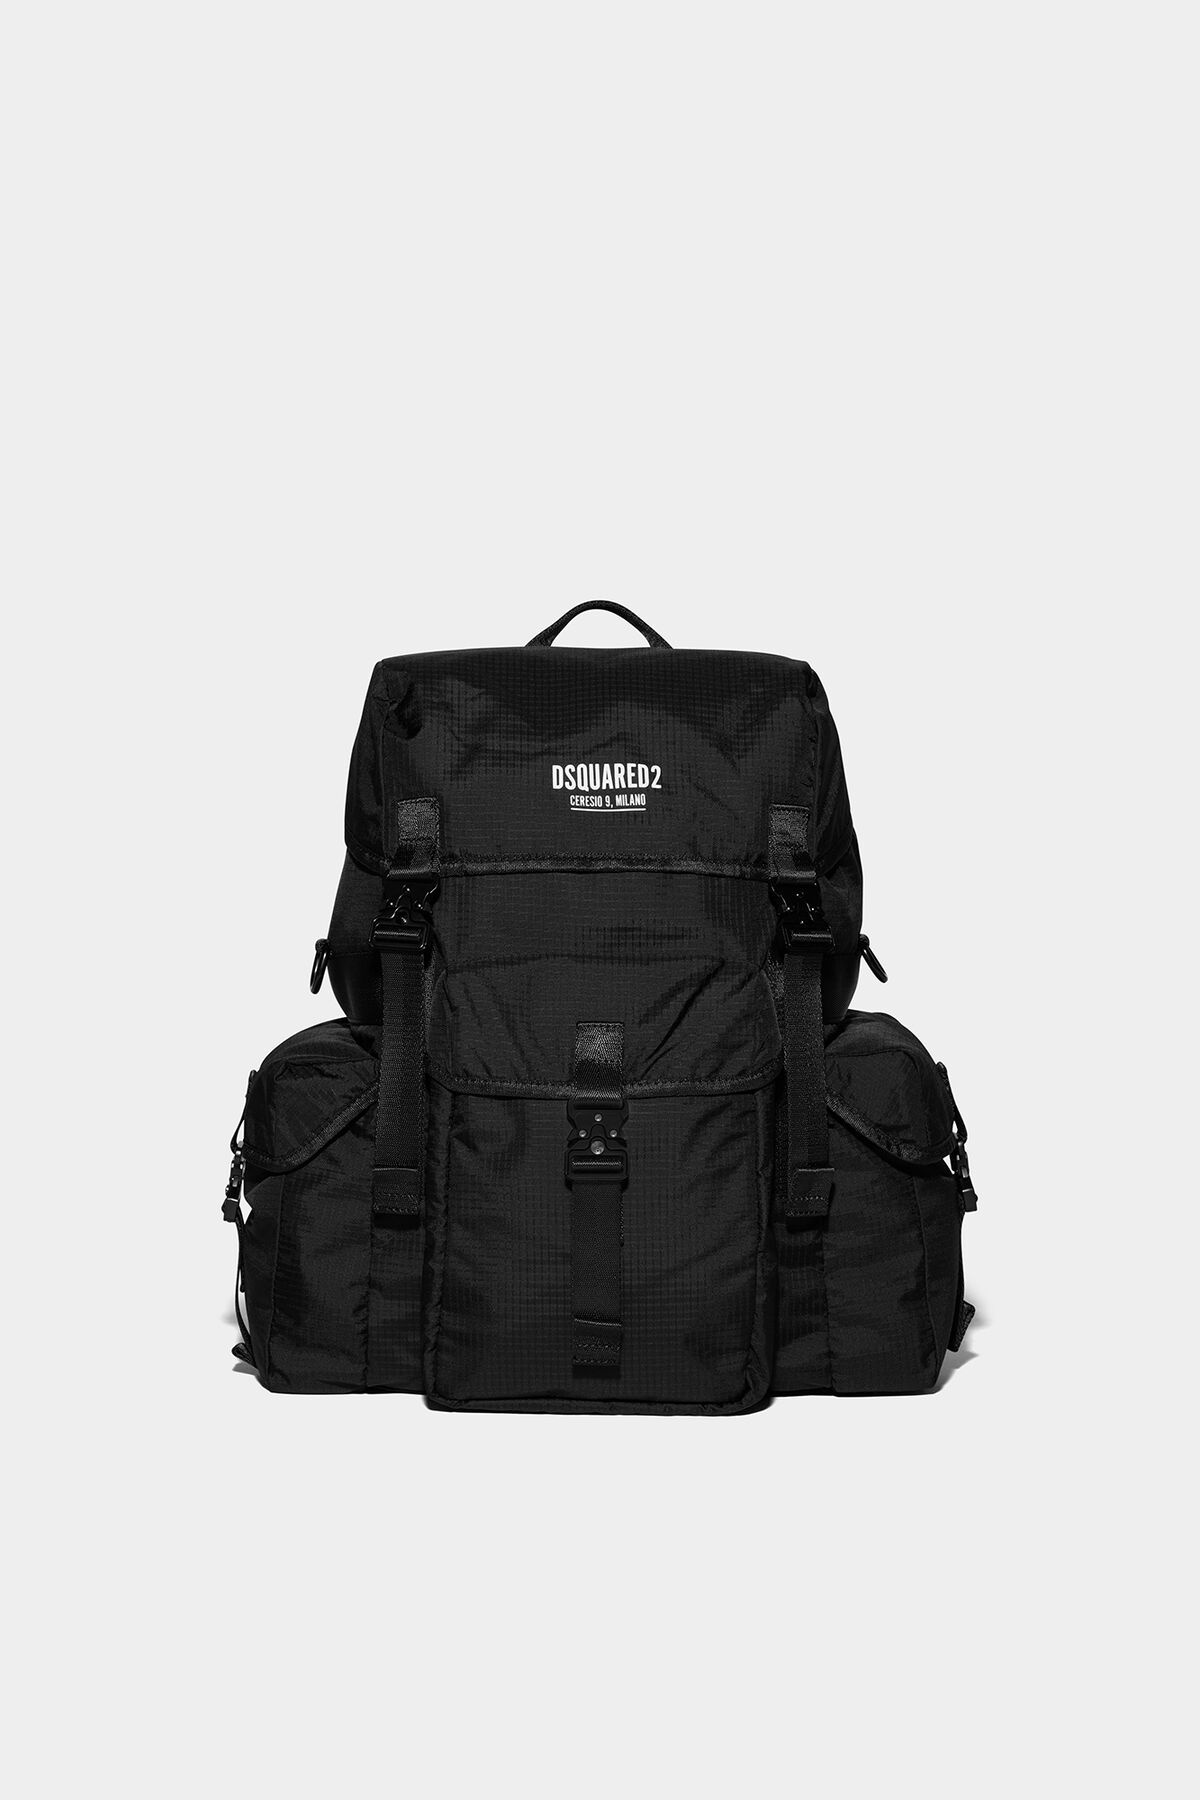 CERESIO 9 BACKPACK - 1